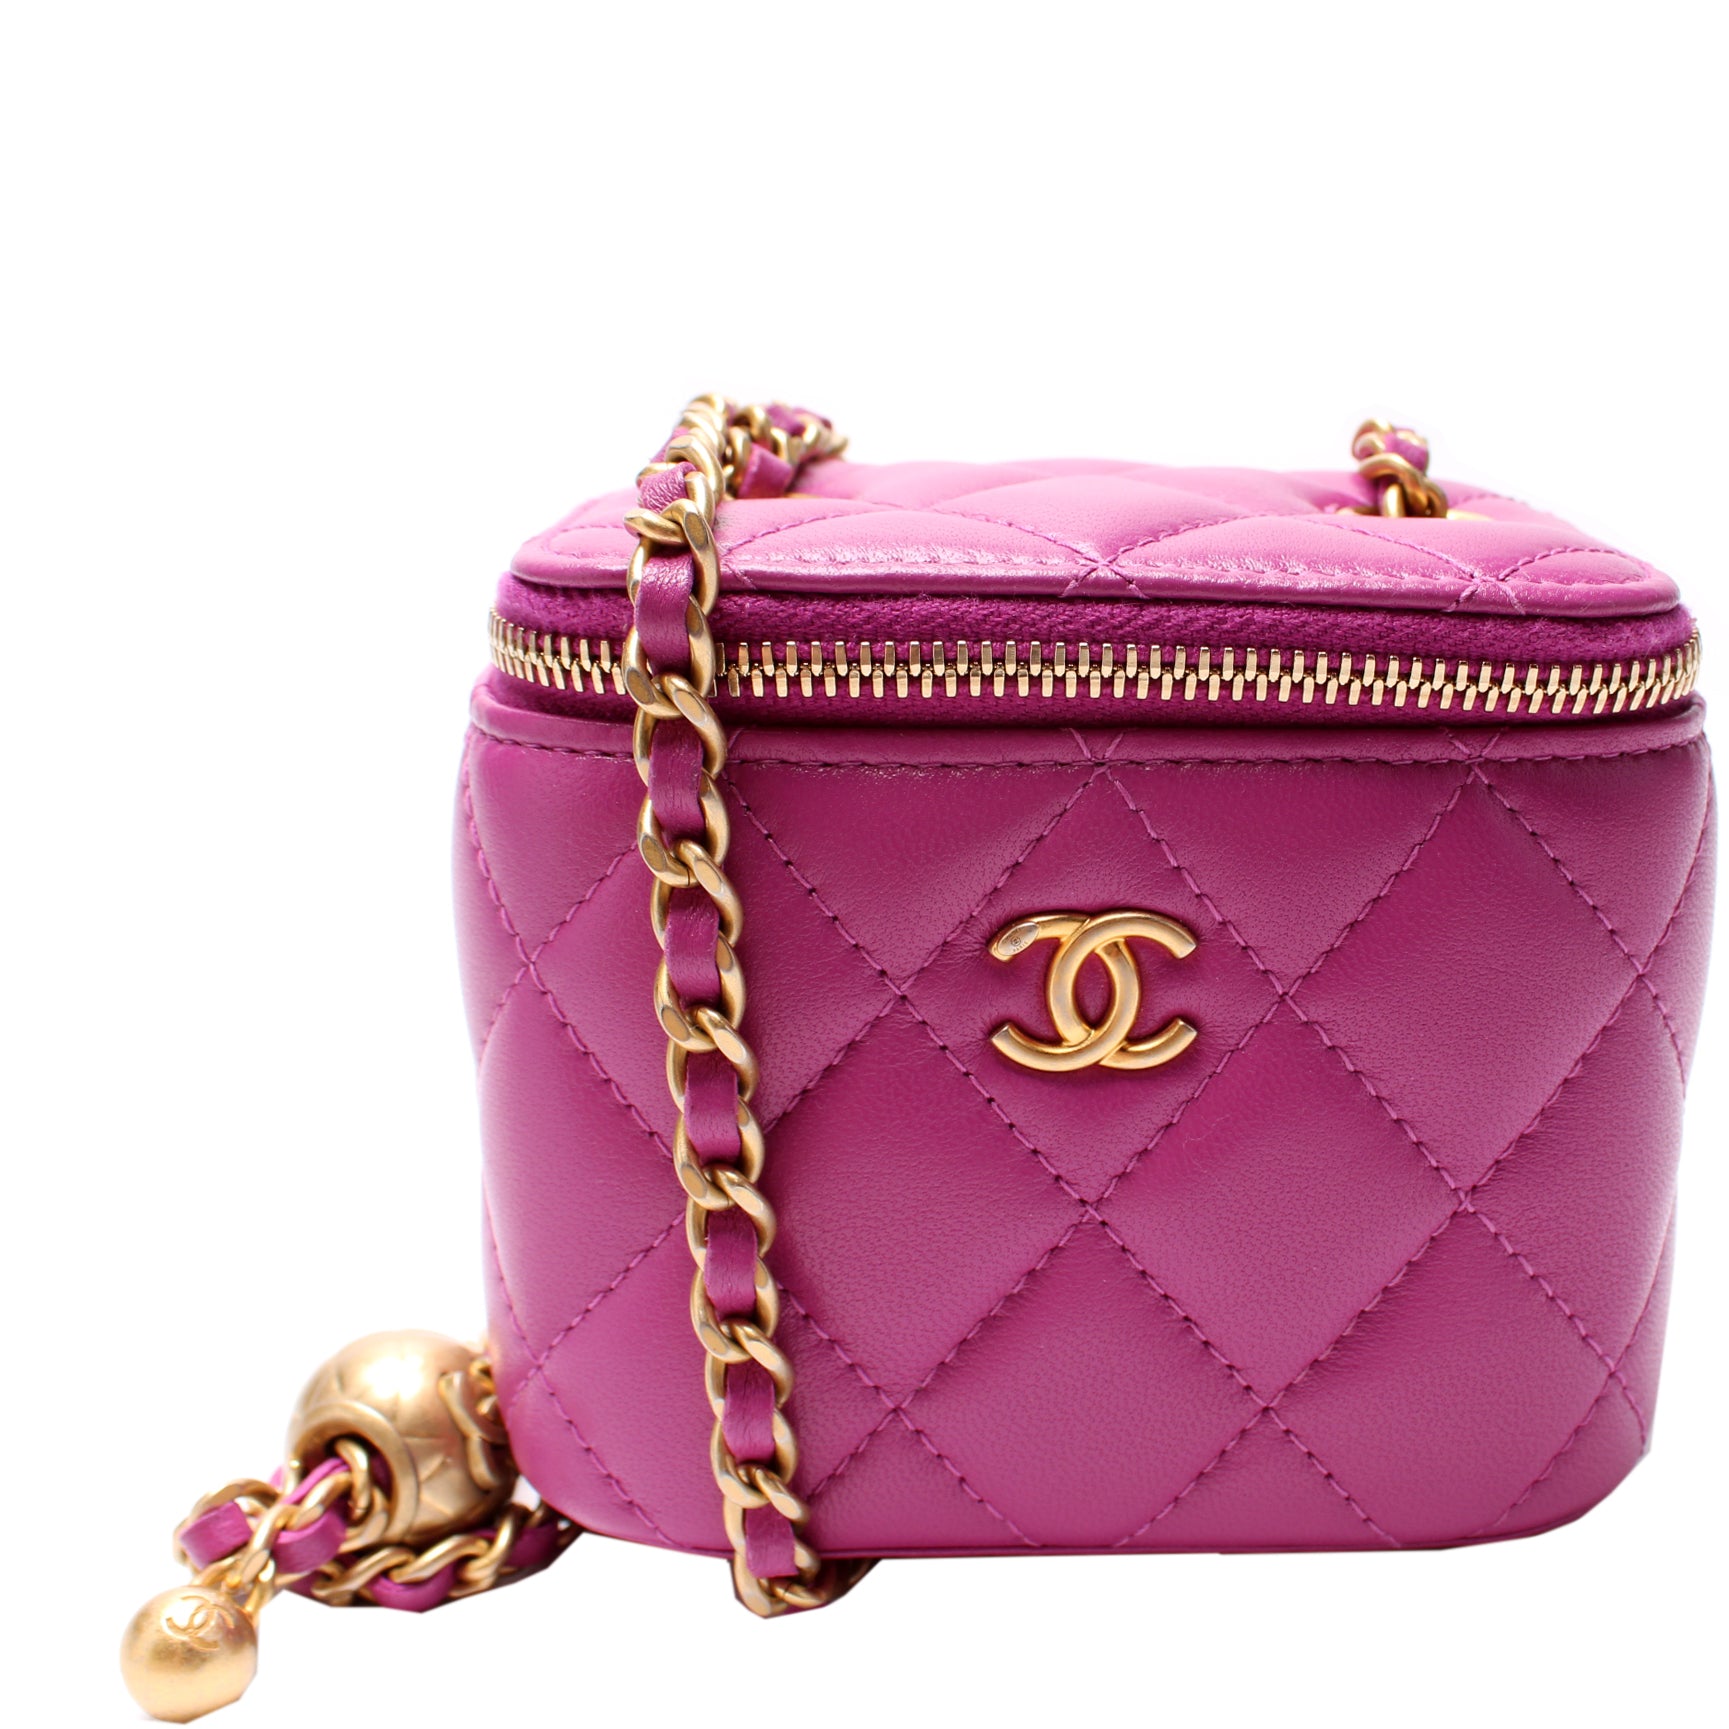 Chanel pink lambskin mini case bag with pearl and chain strap